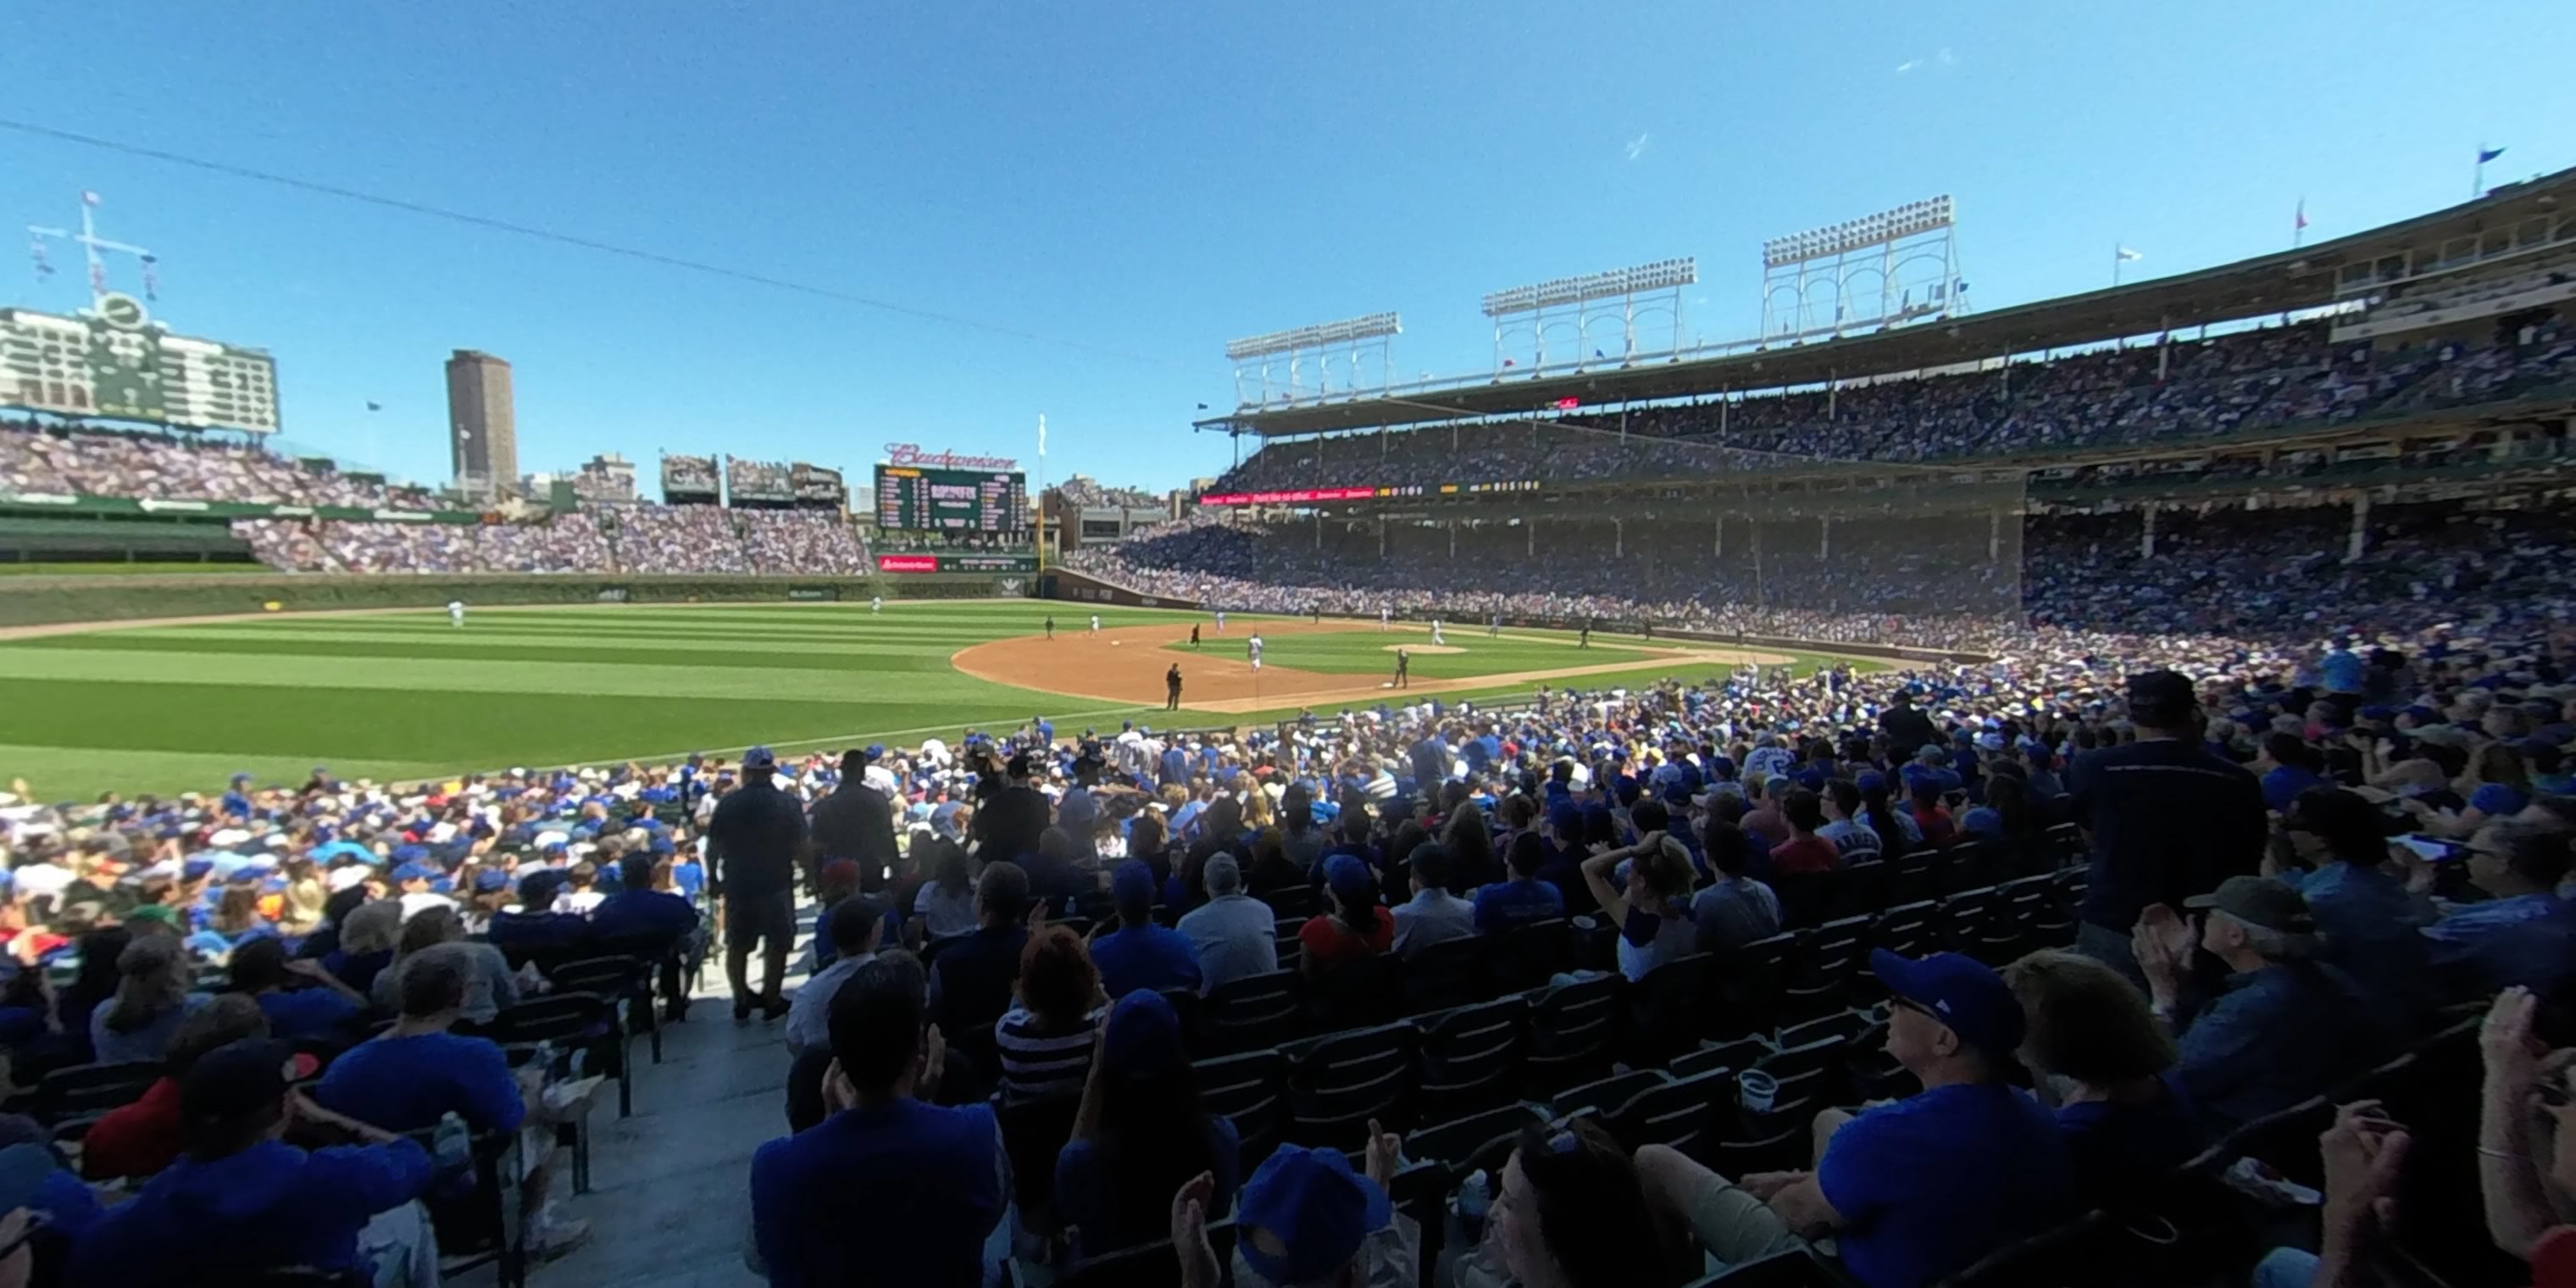 section 107 panoramic seat view  for baseball - wrigley field